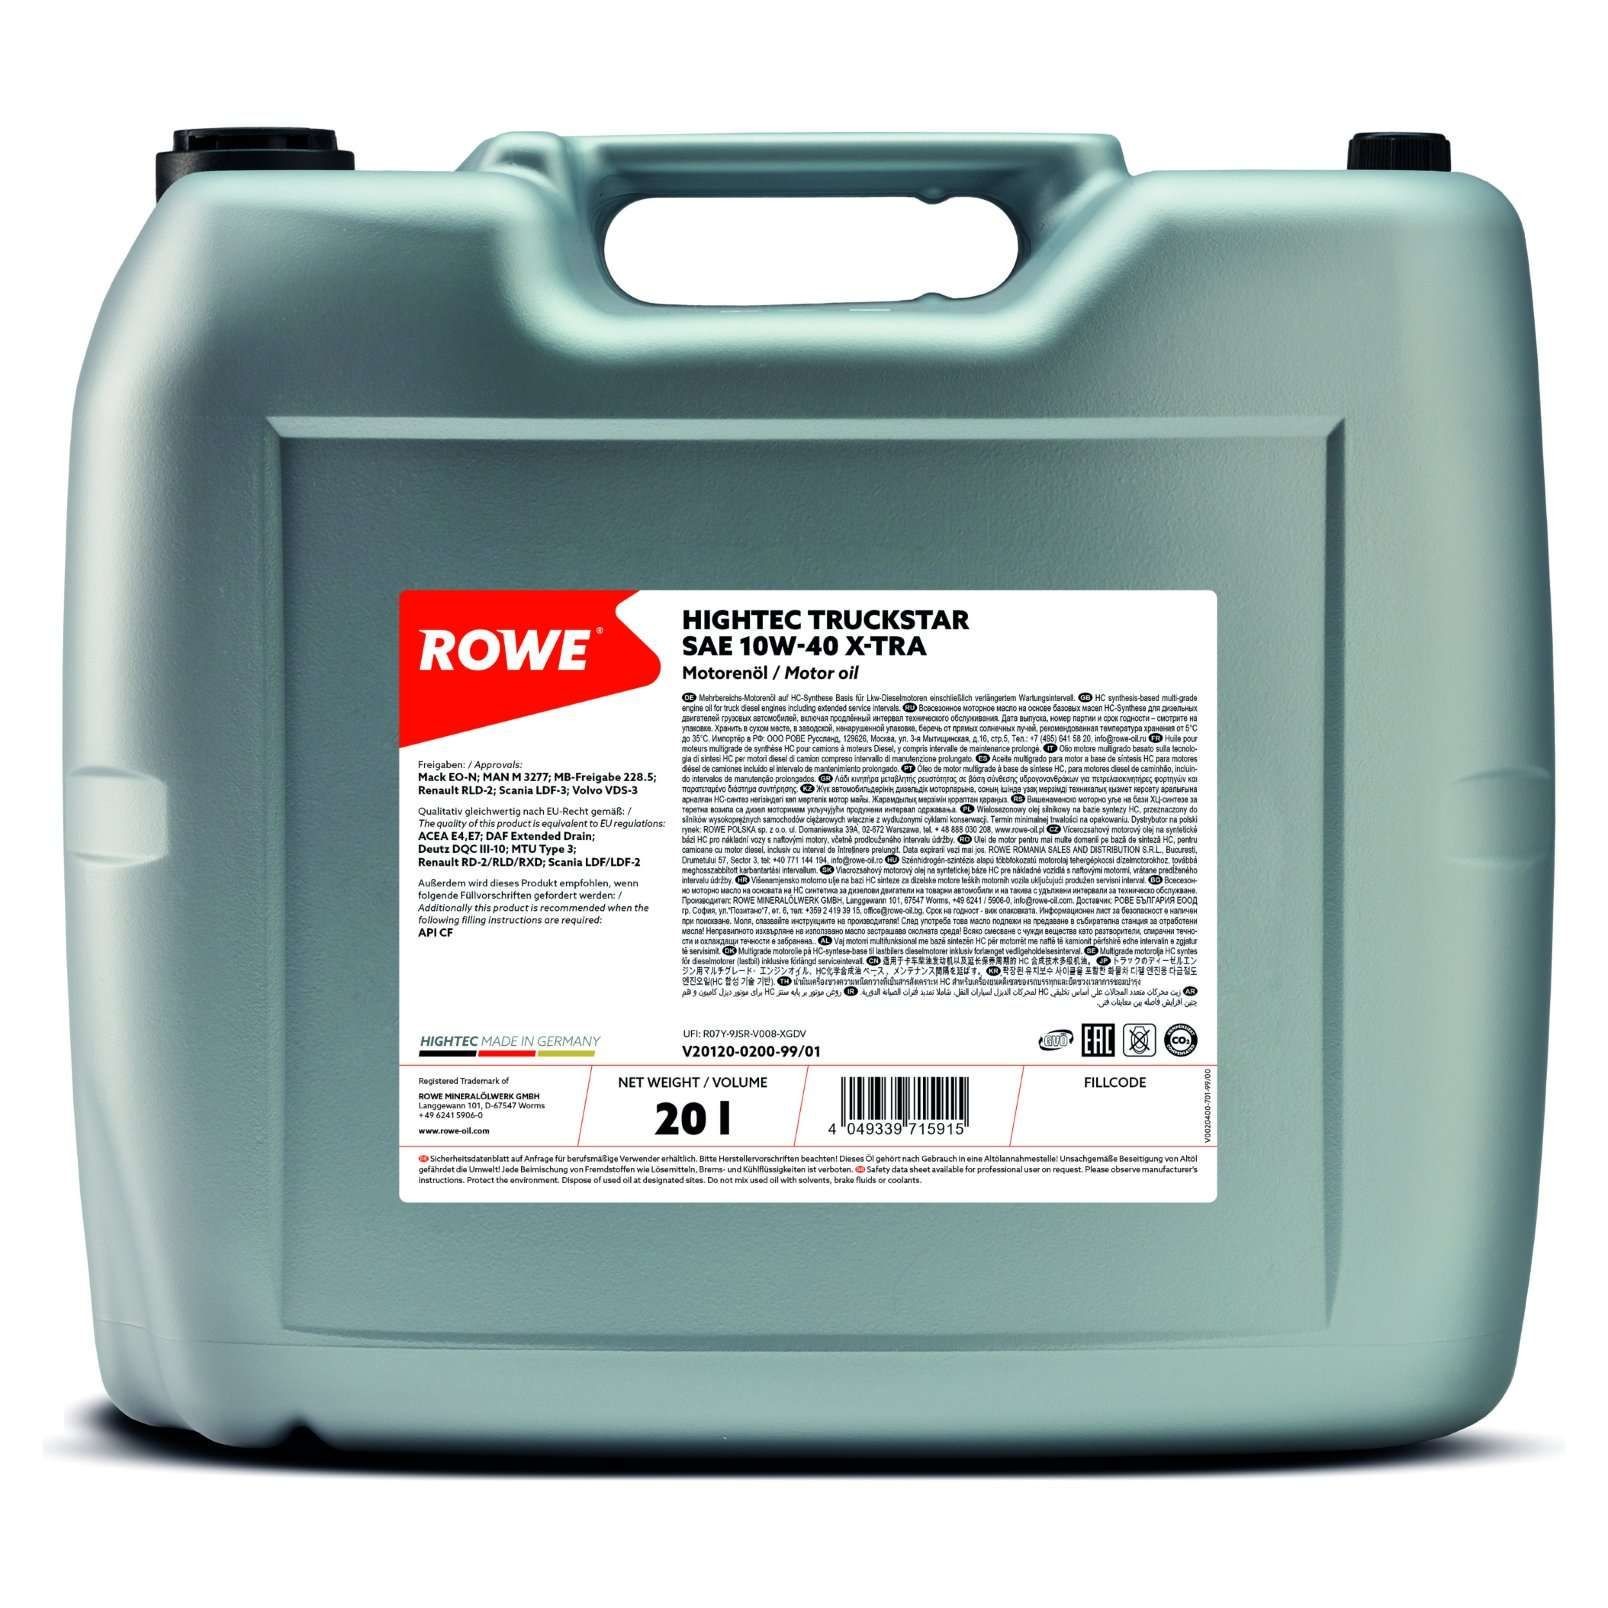 Engine oil ROWE 10W-40, 20l, HC synth. oil (hydro-cracked) longlife 20120-0200-99